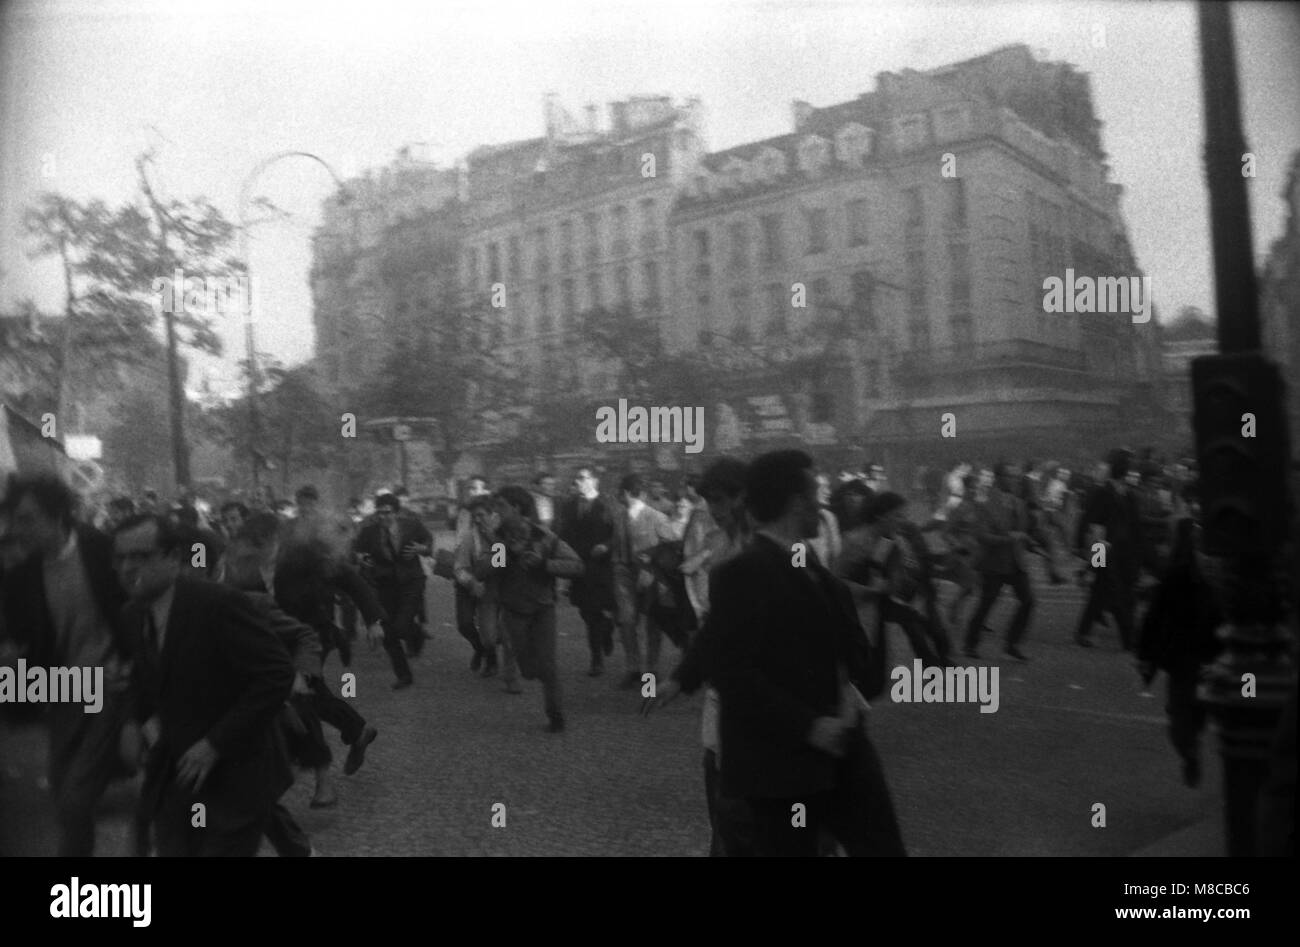 Philippe Gras / Le Pictorium -  May 68 -  1968  -  France / Ile-de-France (region) / Paris  -  Clashes Saint Germain Boulevard between protesters and police Stock Photo